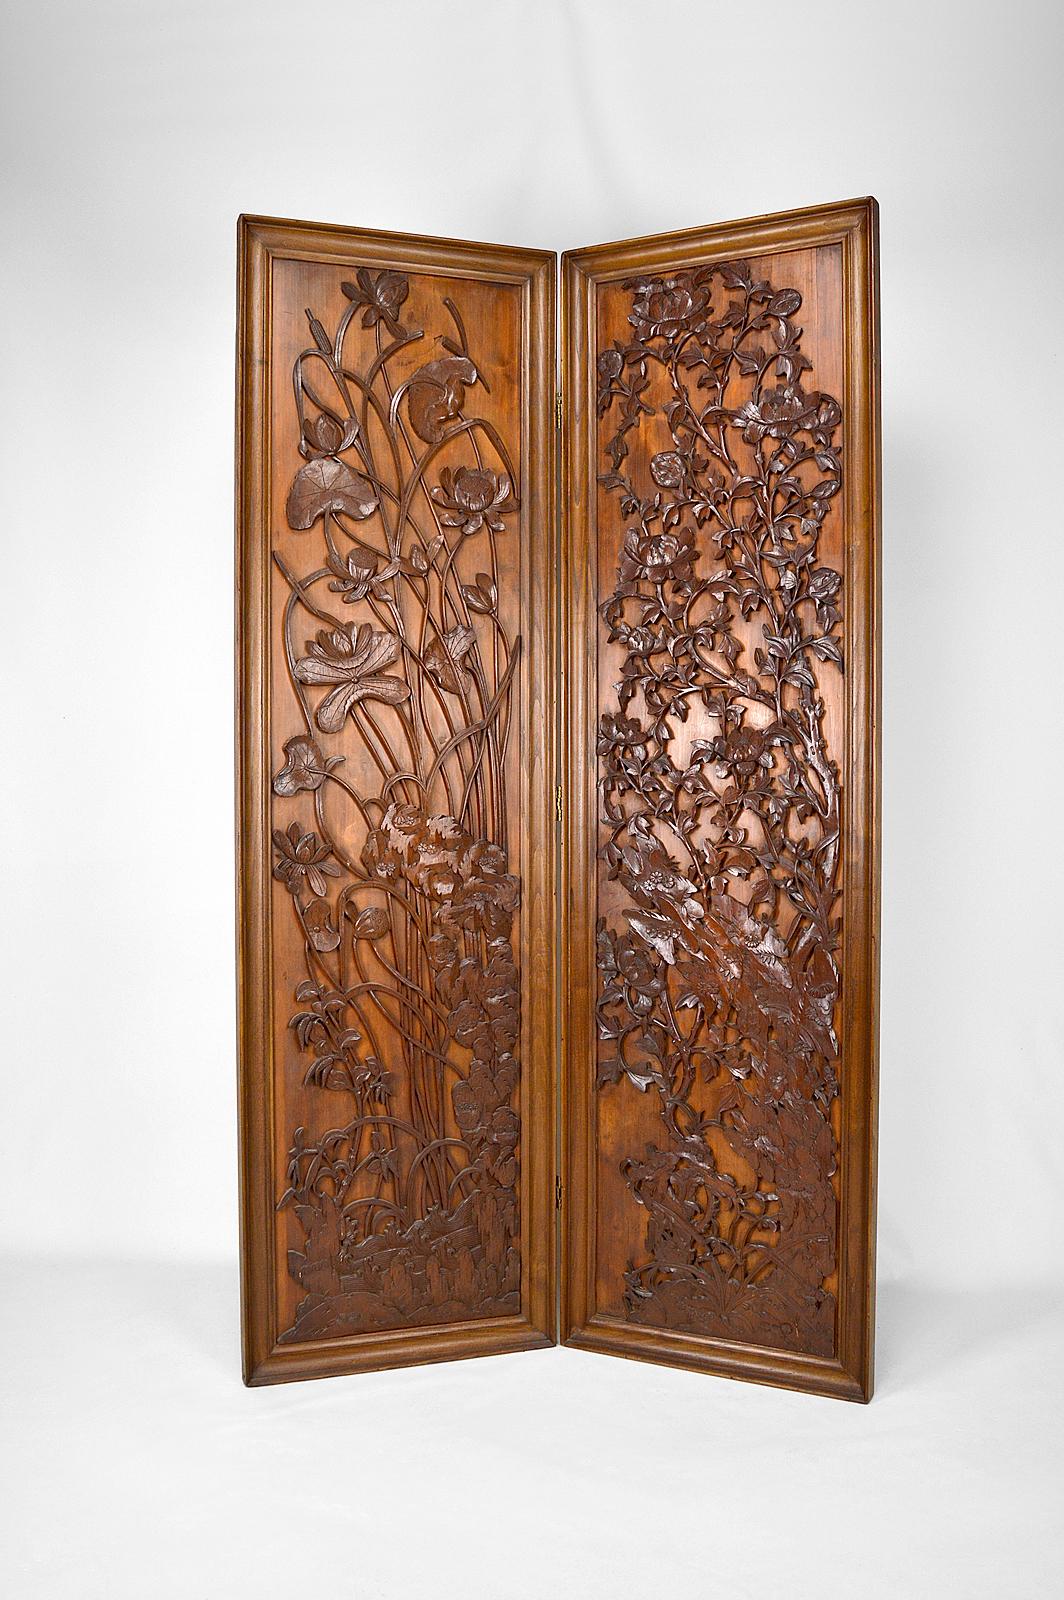 French Floral Art Nouveau Japonism Folding Screen in Carved Wood, France, circa 1890